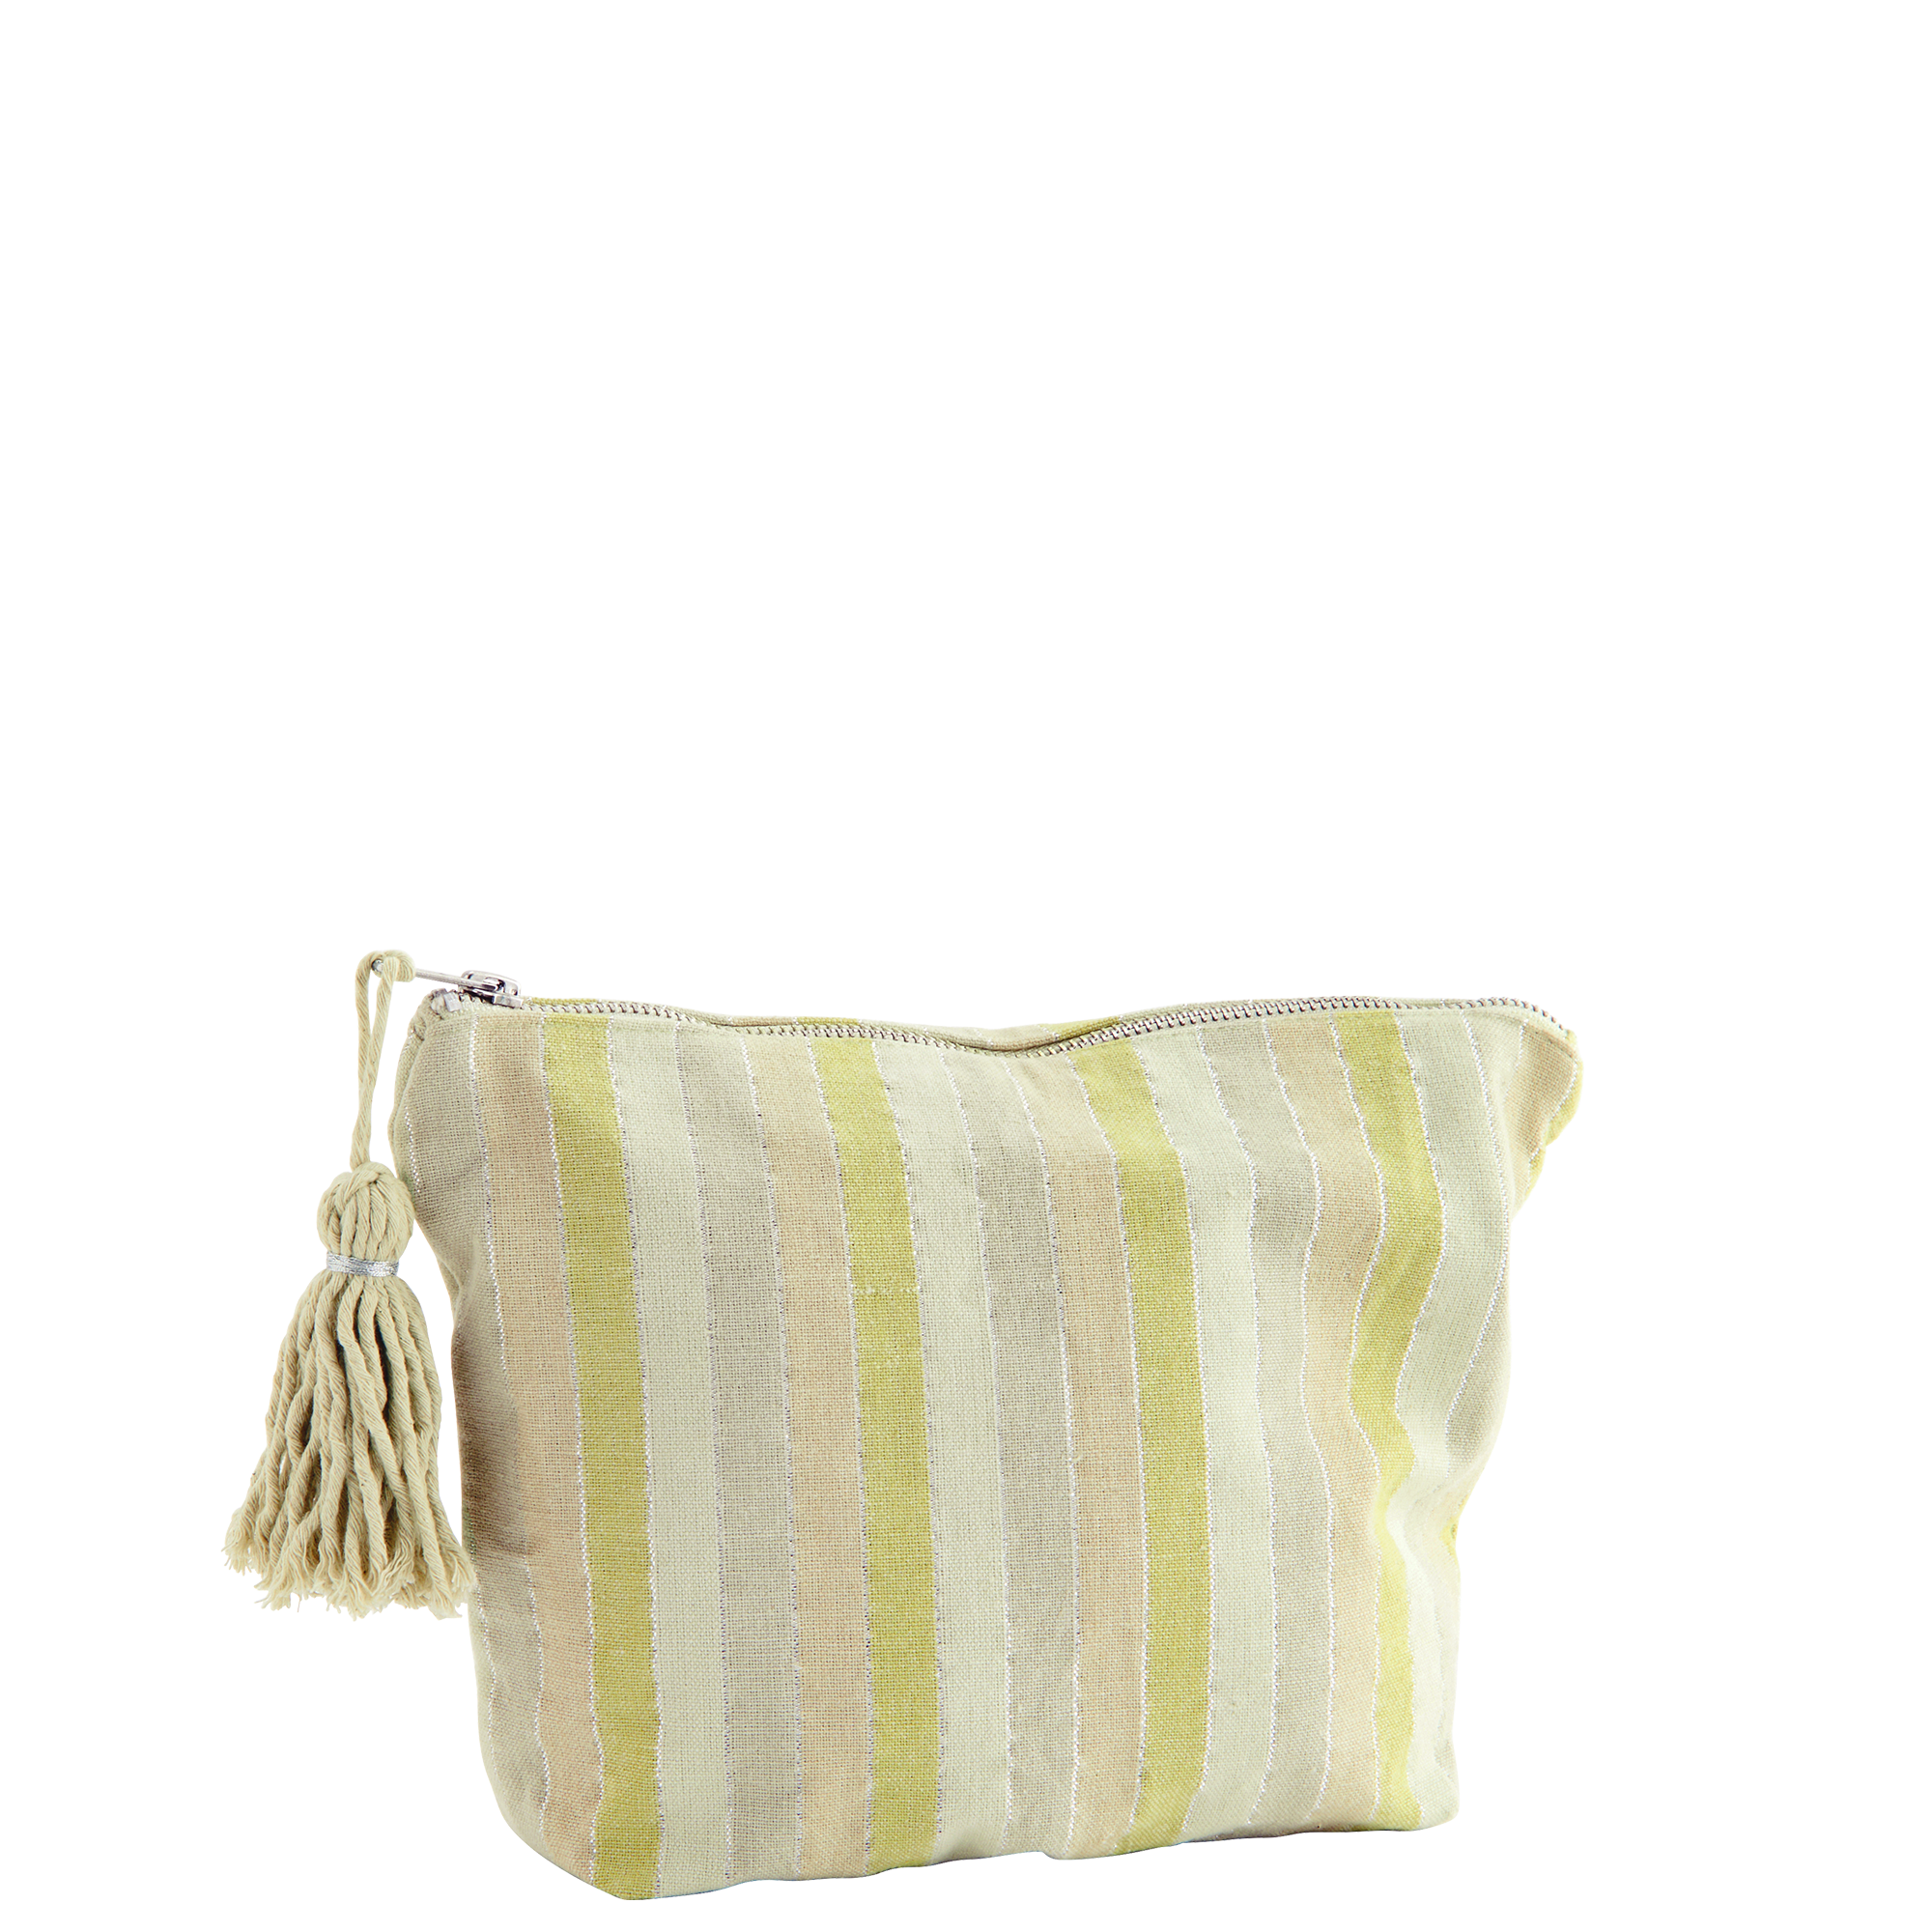 Madam Stoltz Lime Striped Toiletry Bag with Tassel